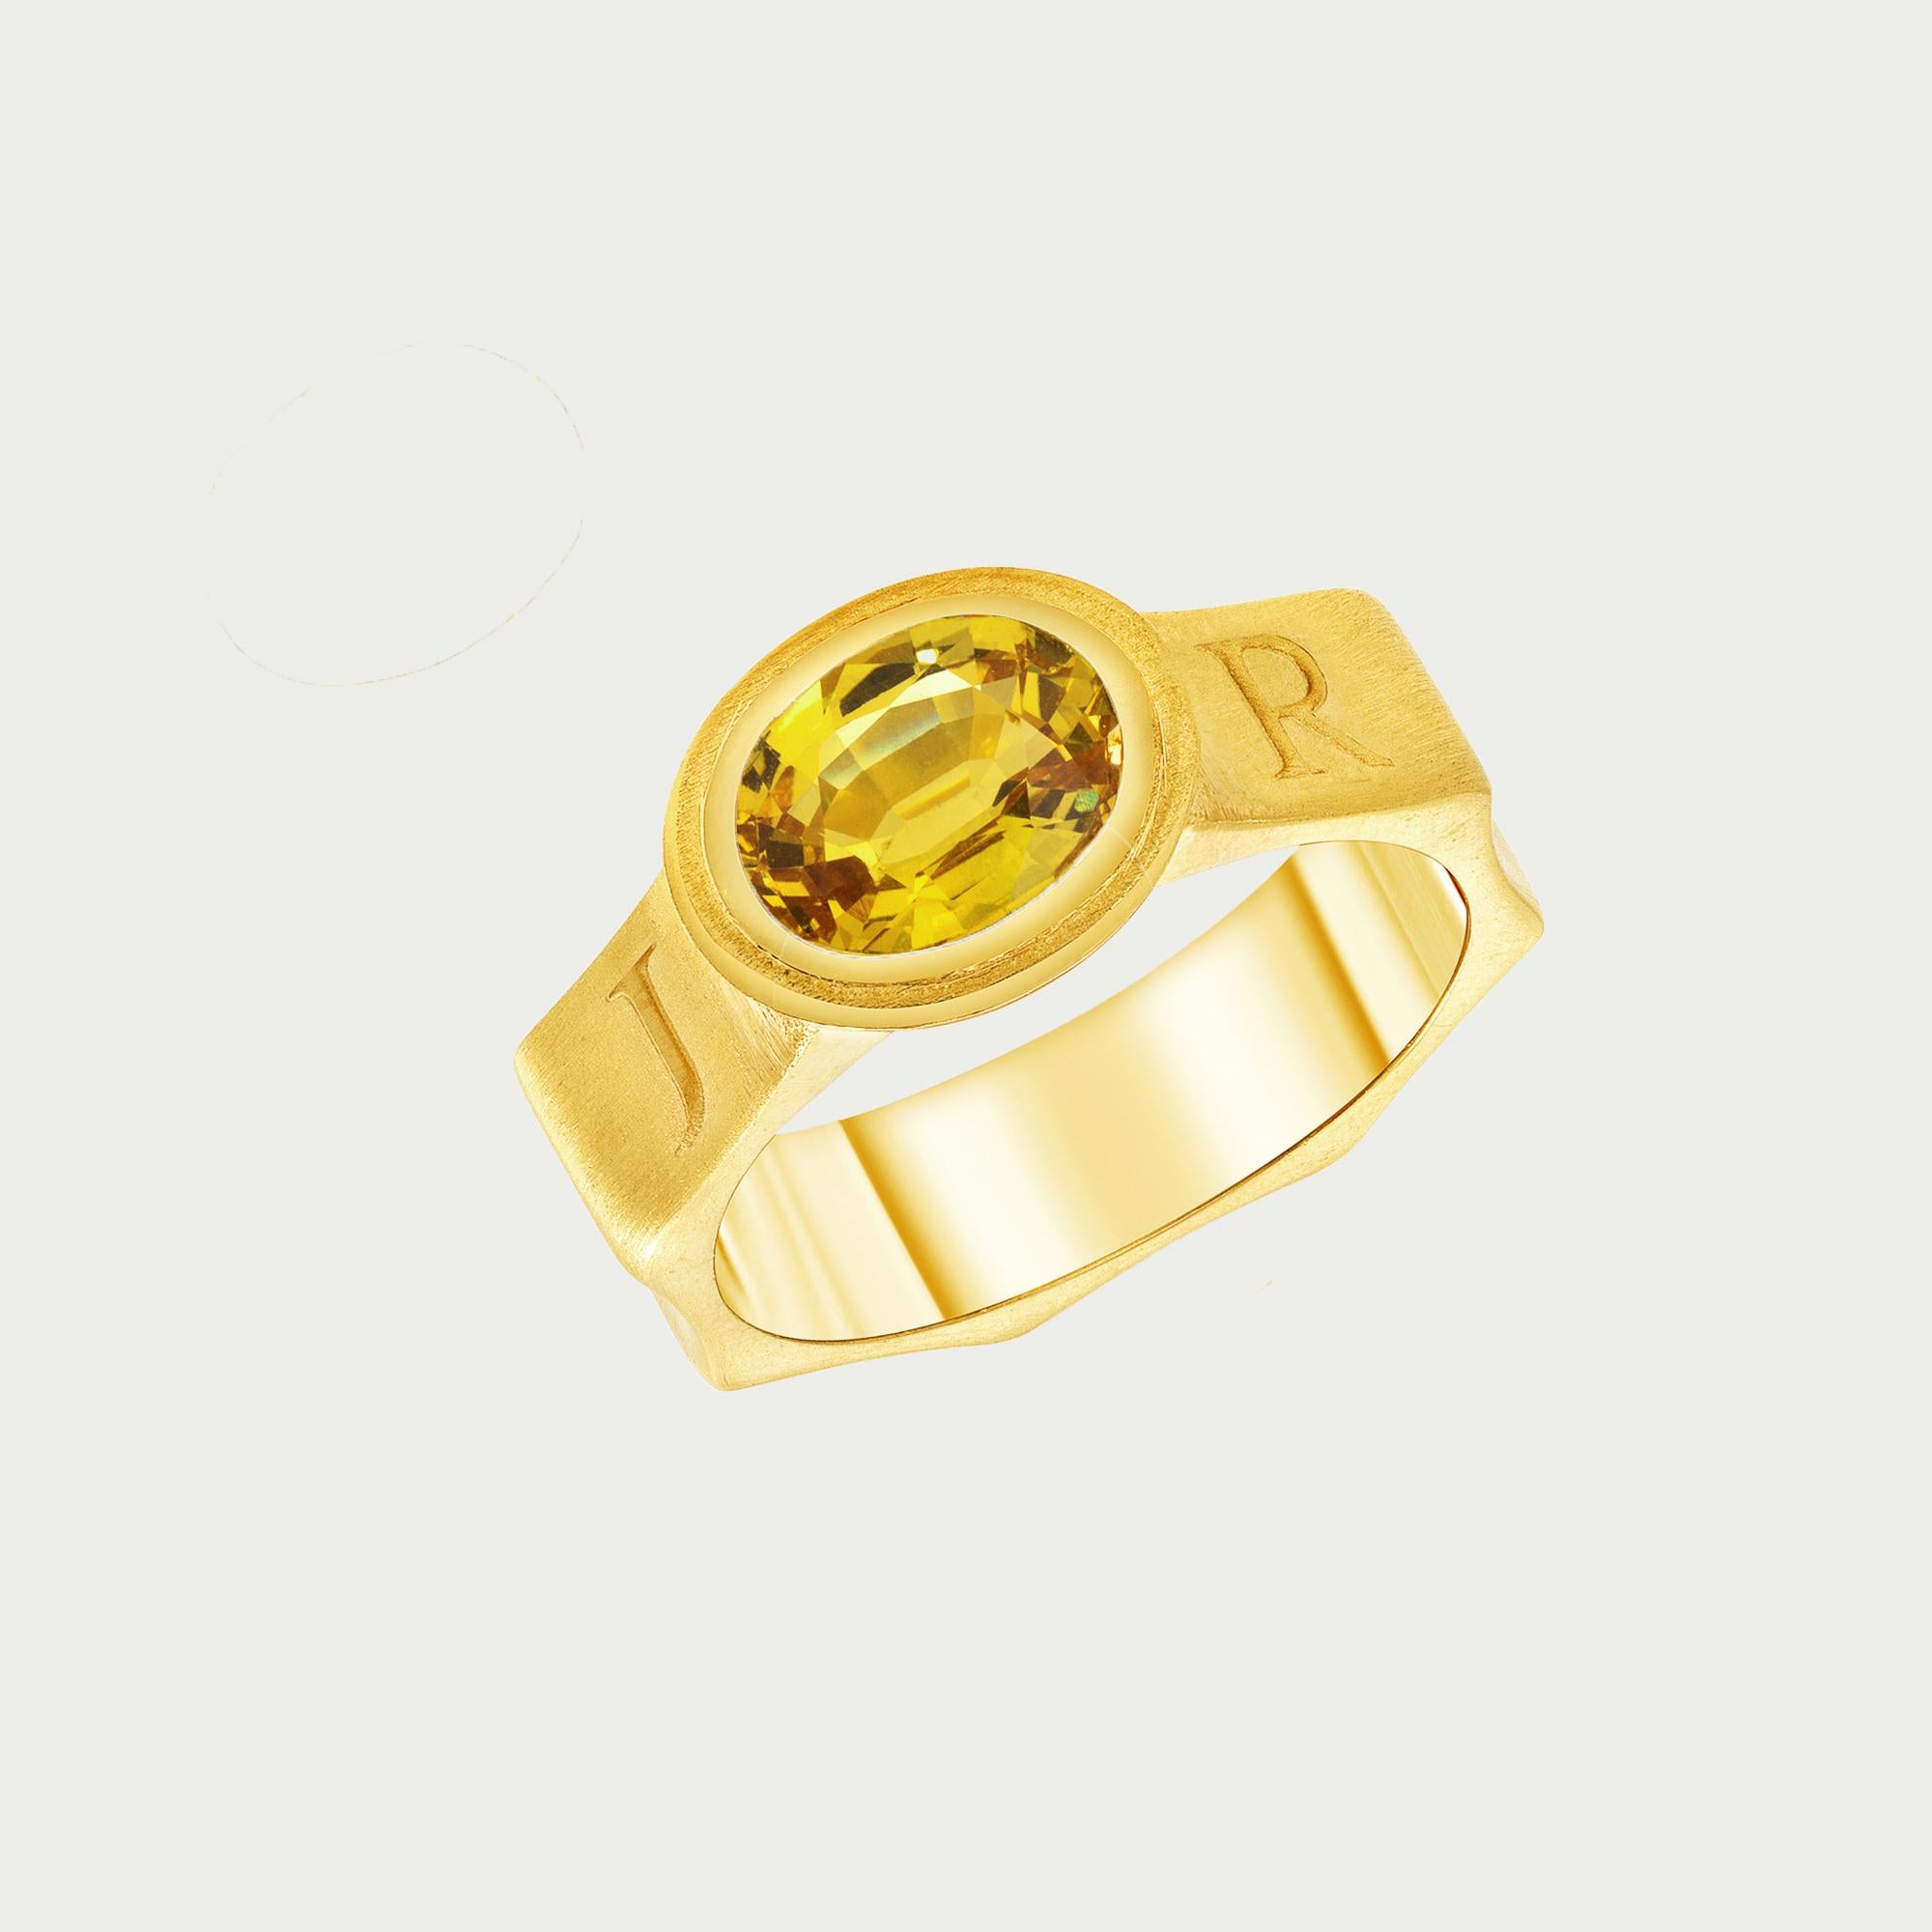 Yellow Sapphire Ring In 22 Karat Yellow Gold 

This unique ring features a 2.3 carat oval shape yellow sapphire crafted into 22 karat yellow gold. The medieval style band is designed in an octagonal shape, and around the band is engraved JUPITER,